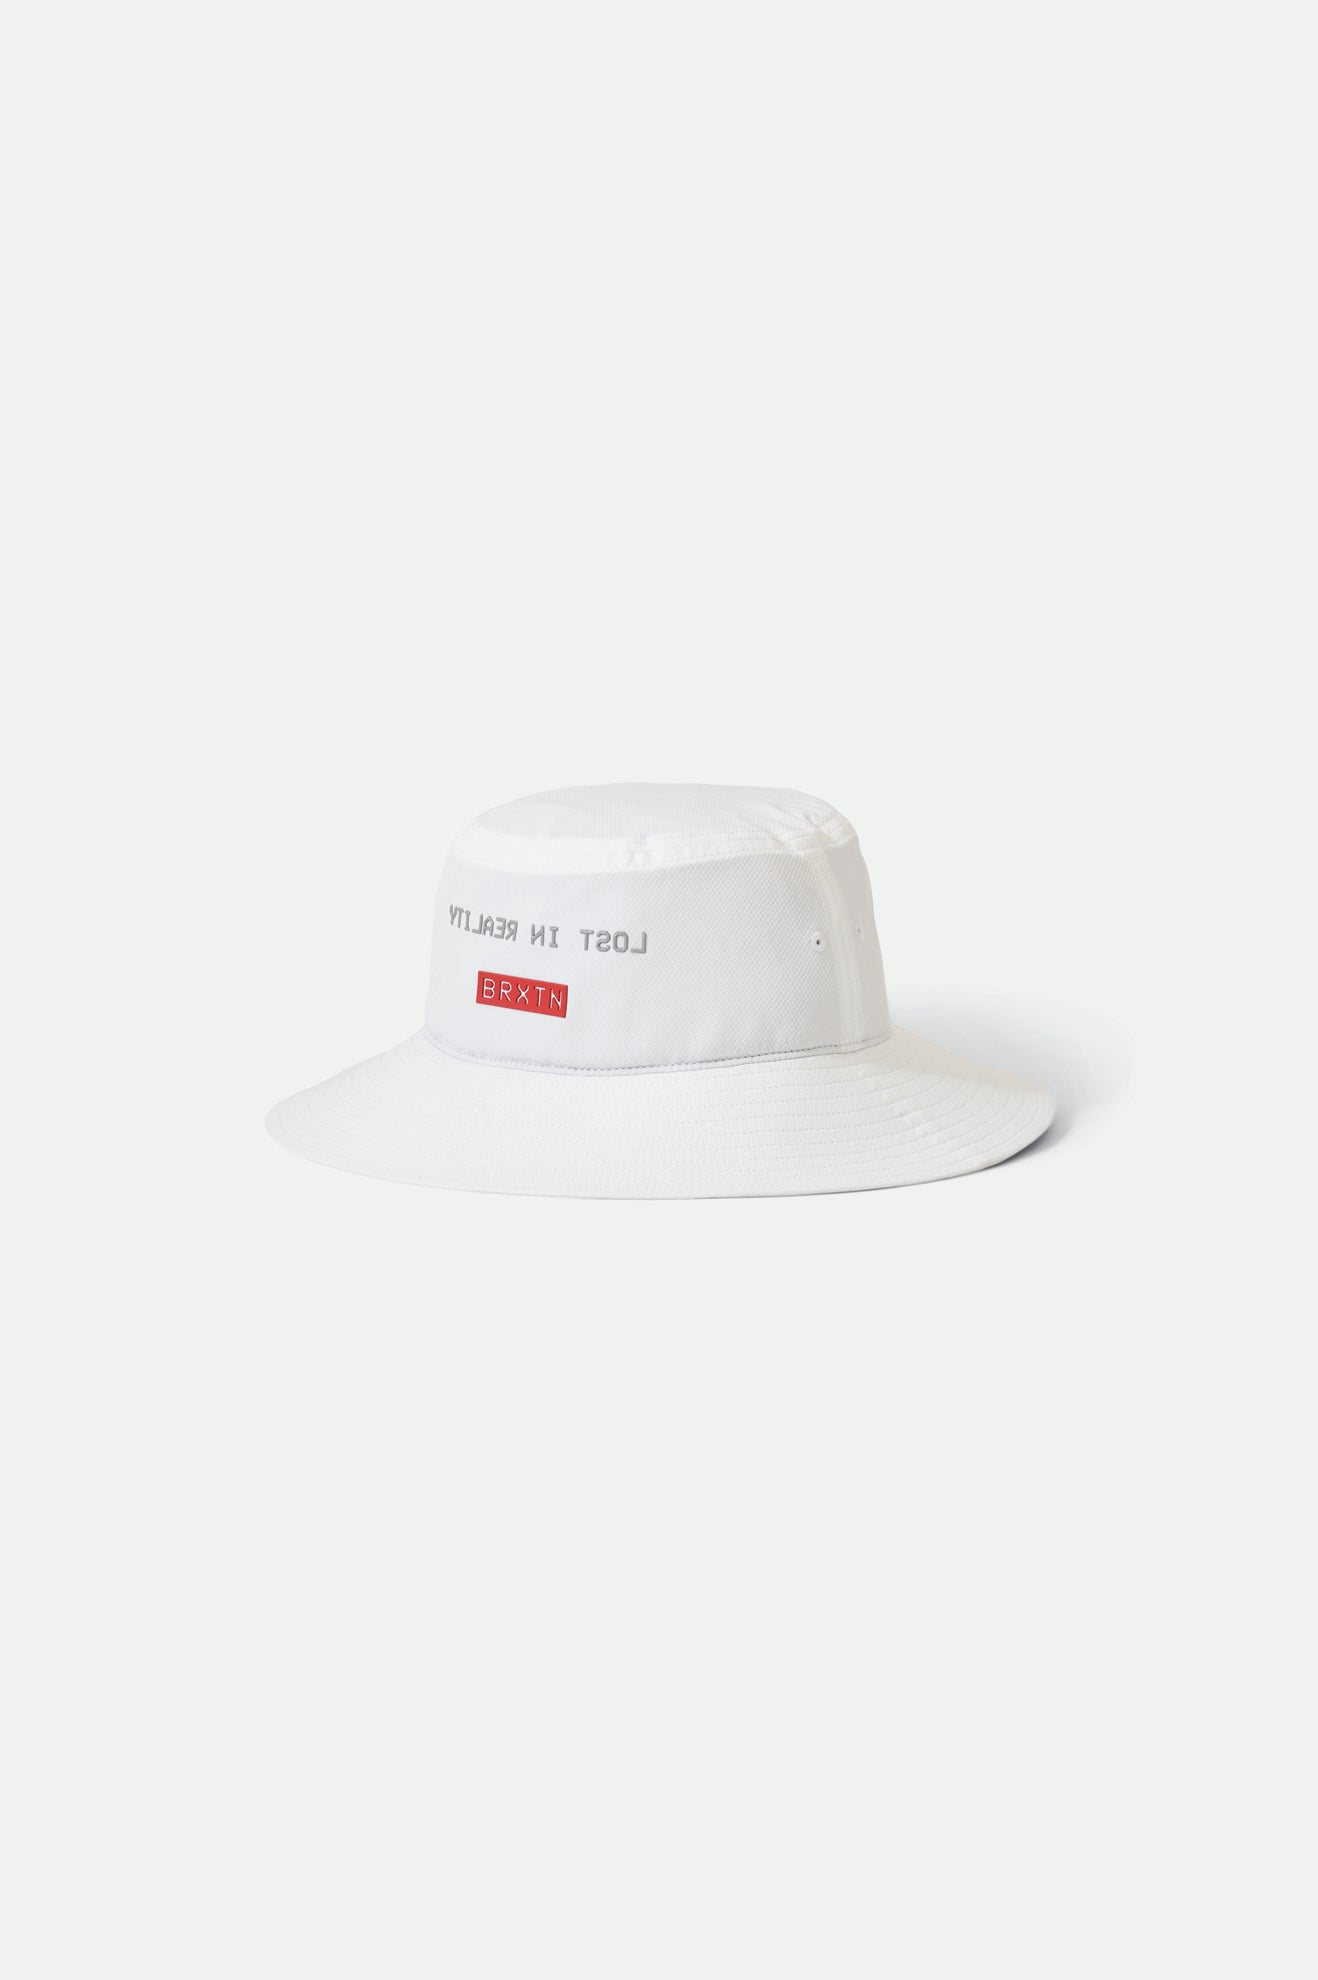 Reflect Utility Packable Bucket Hat - White